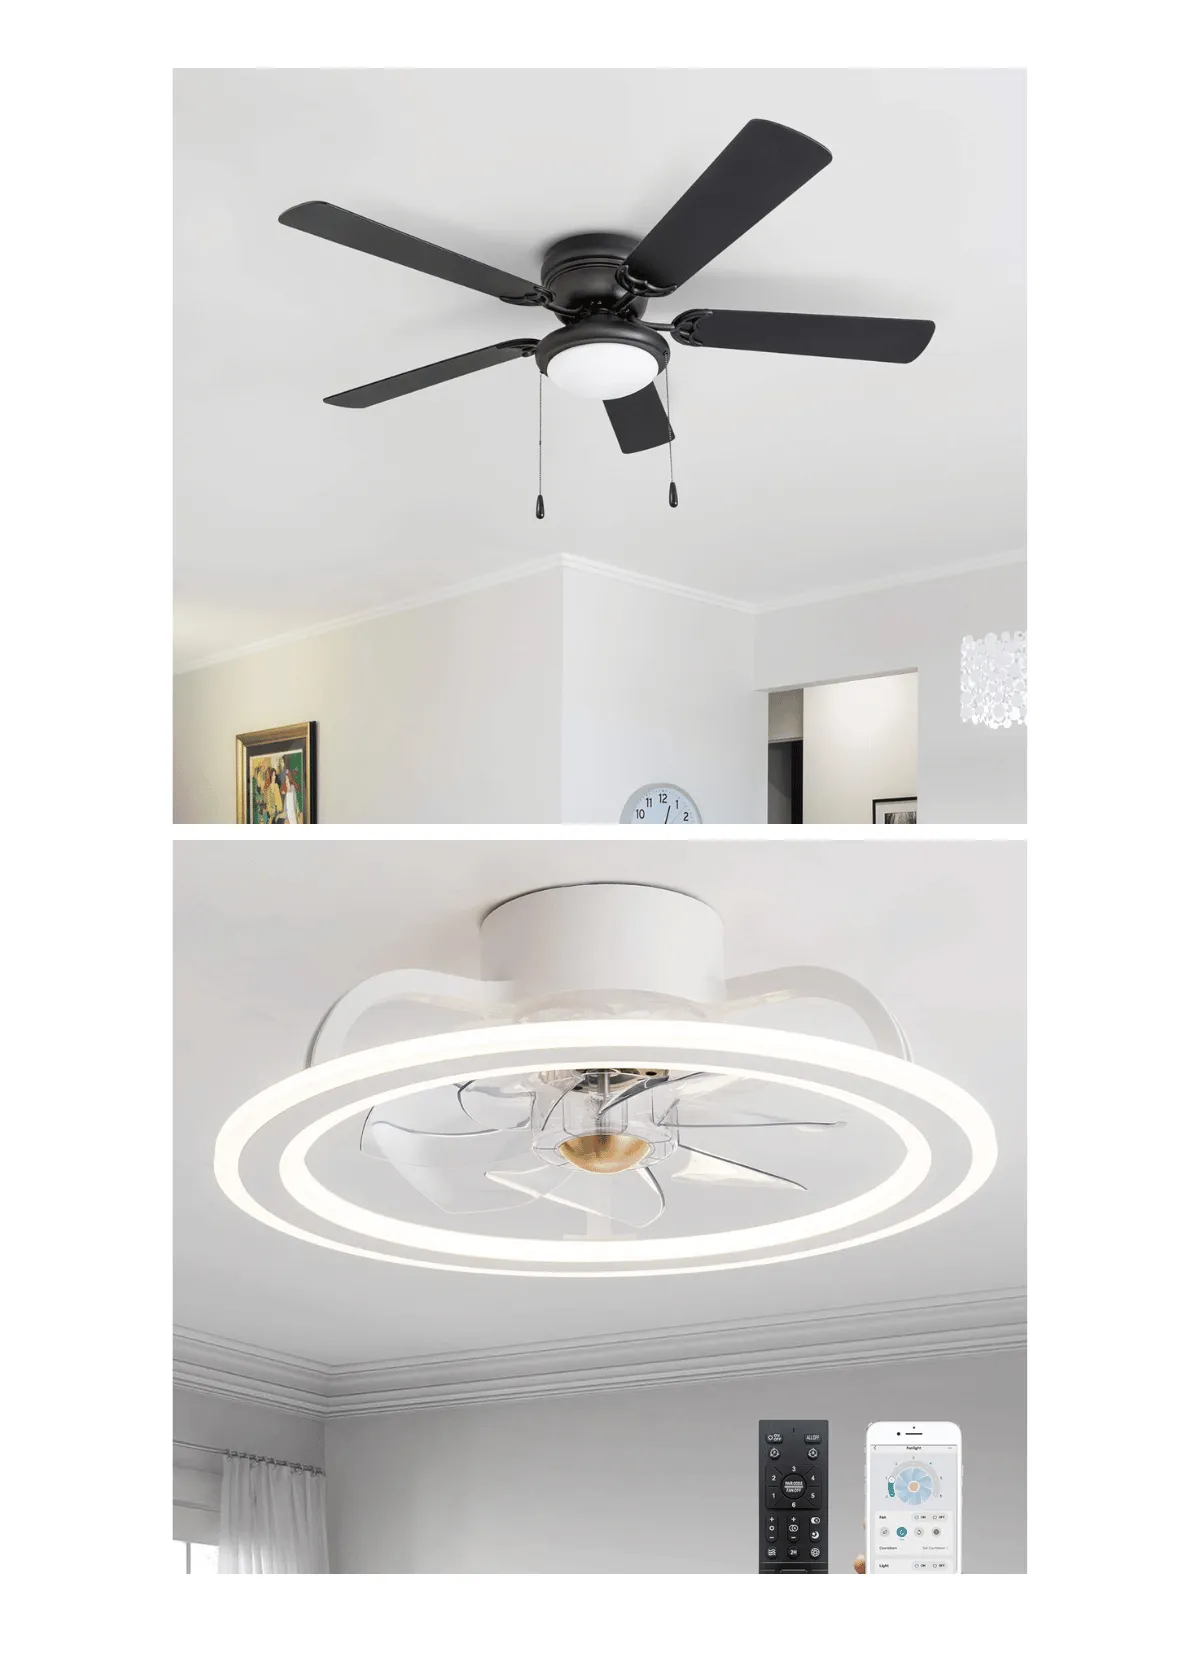 "Best Ceiling Fans For Bedrooms: Stylish, Comfy, and Affordable"